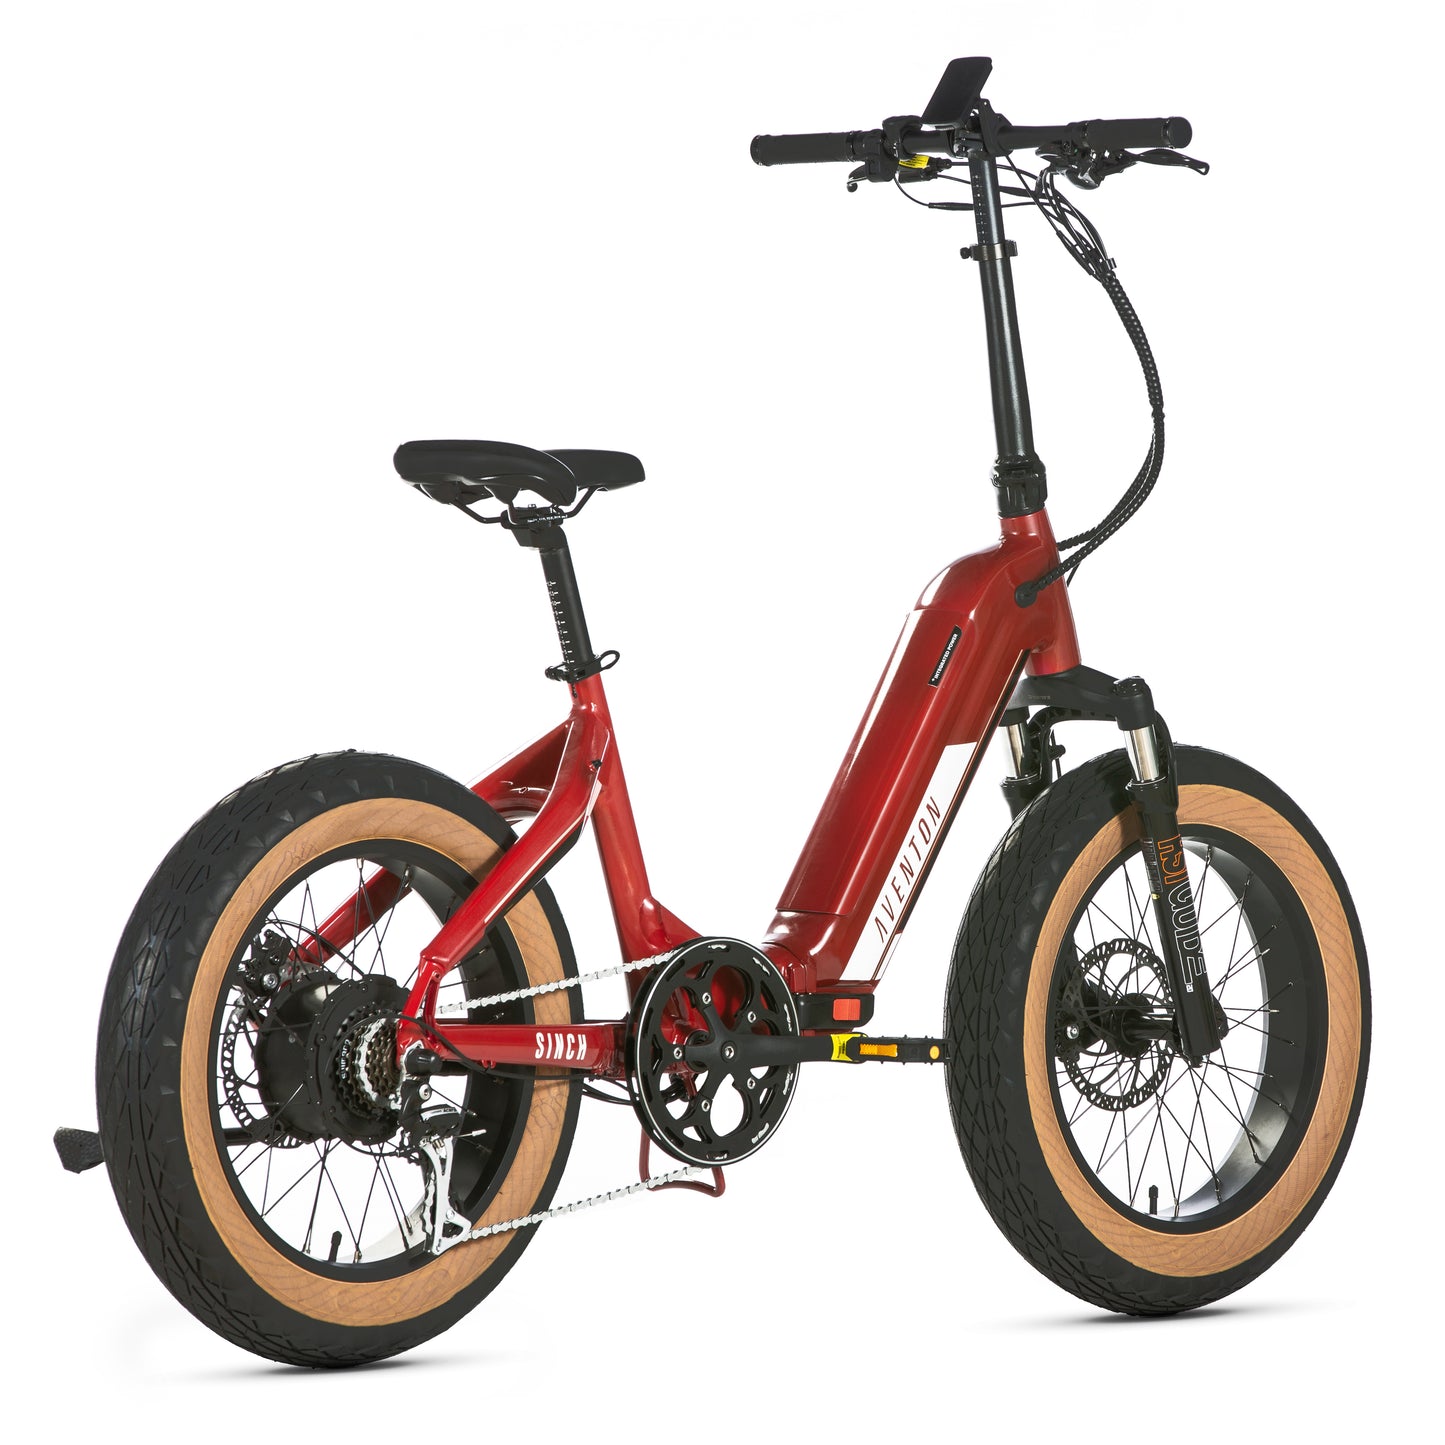 An Aventon Bonfire Red electric bike on a white background.